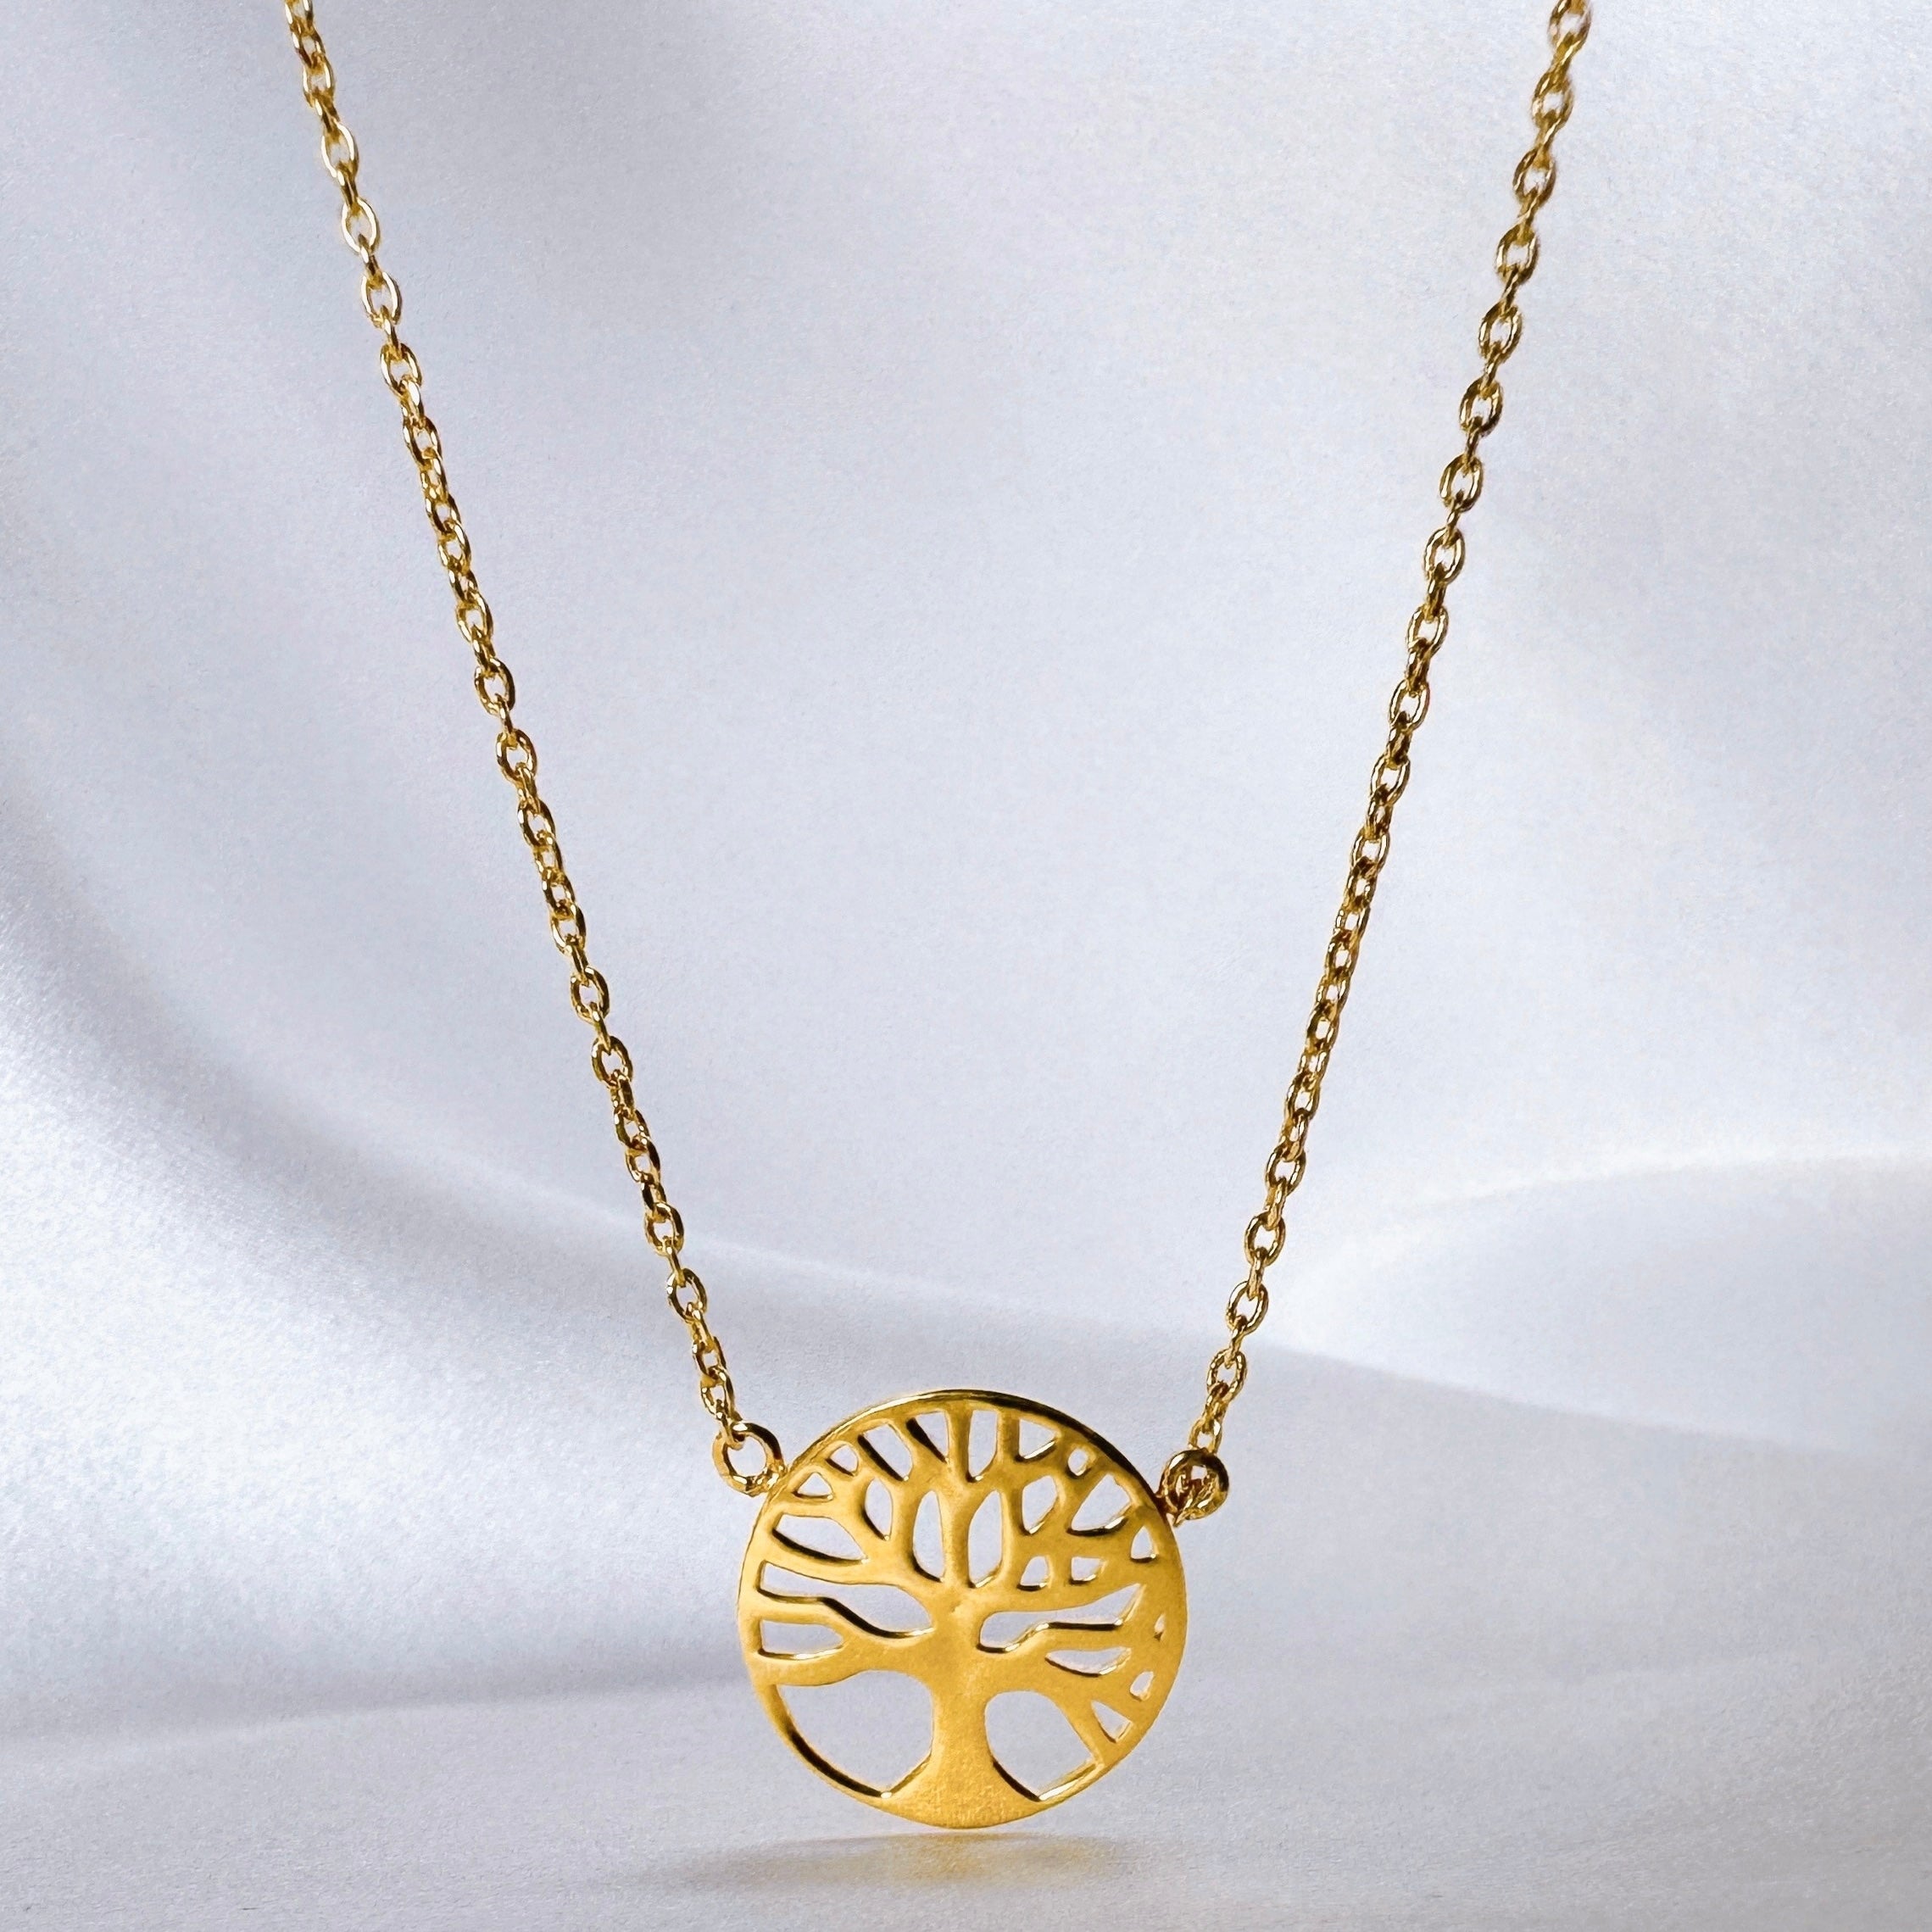 Gold-plated “Tree of Life” necklace